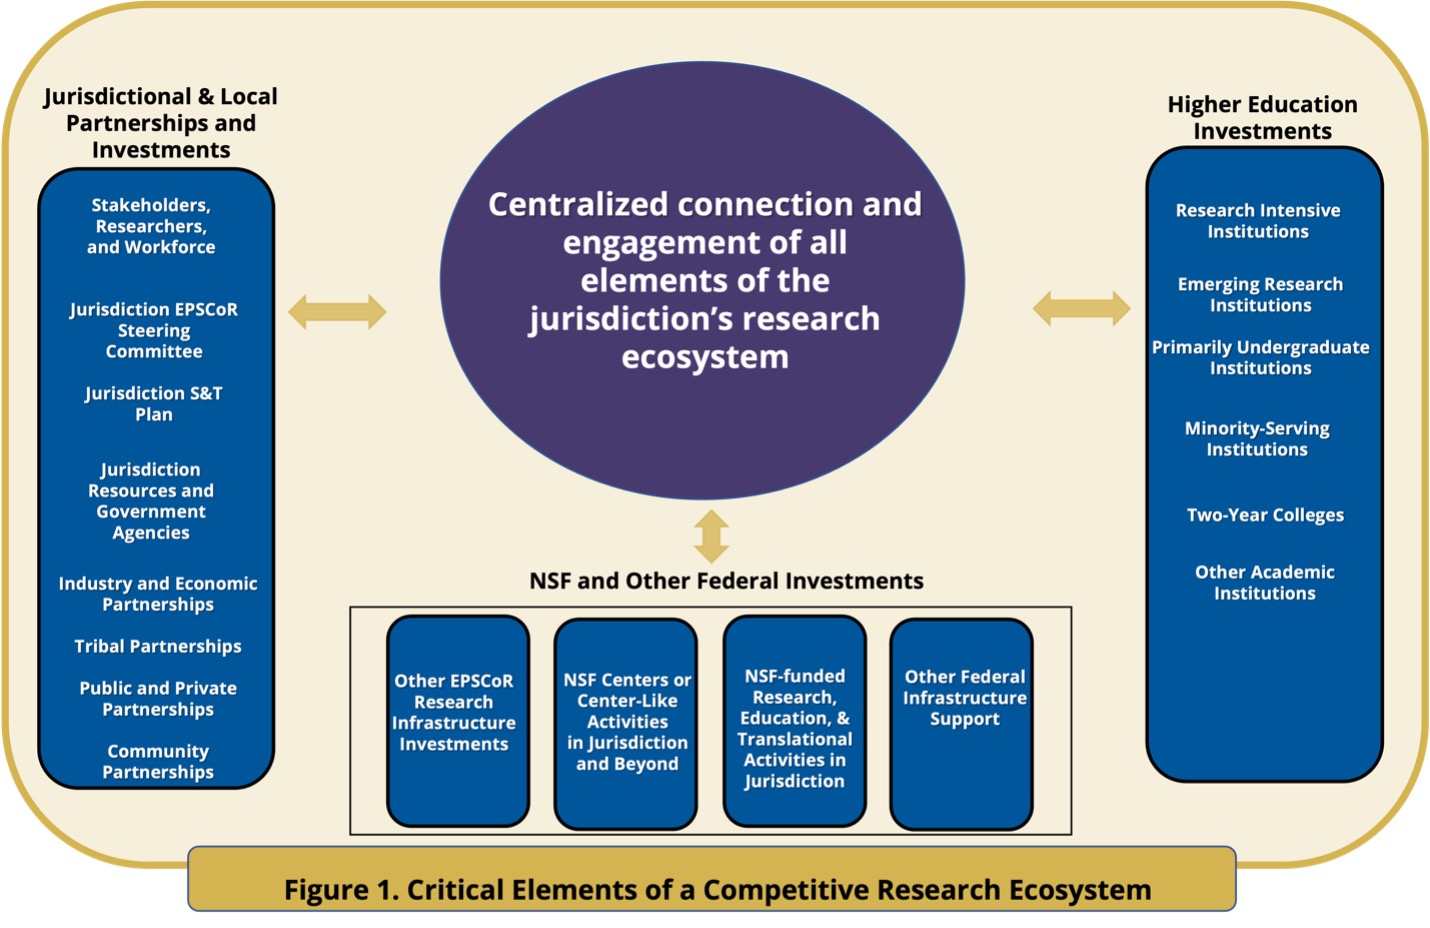 Critical Elements of a Competitive Research Ecosystem